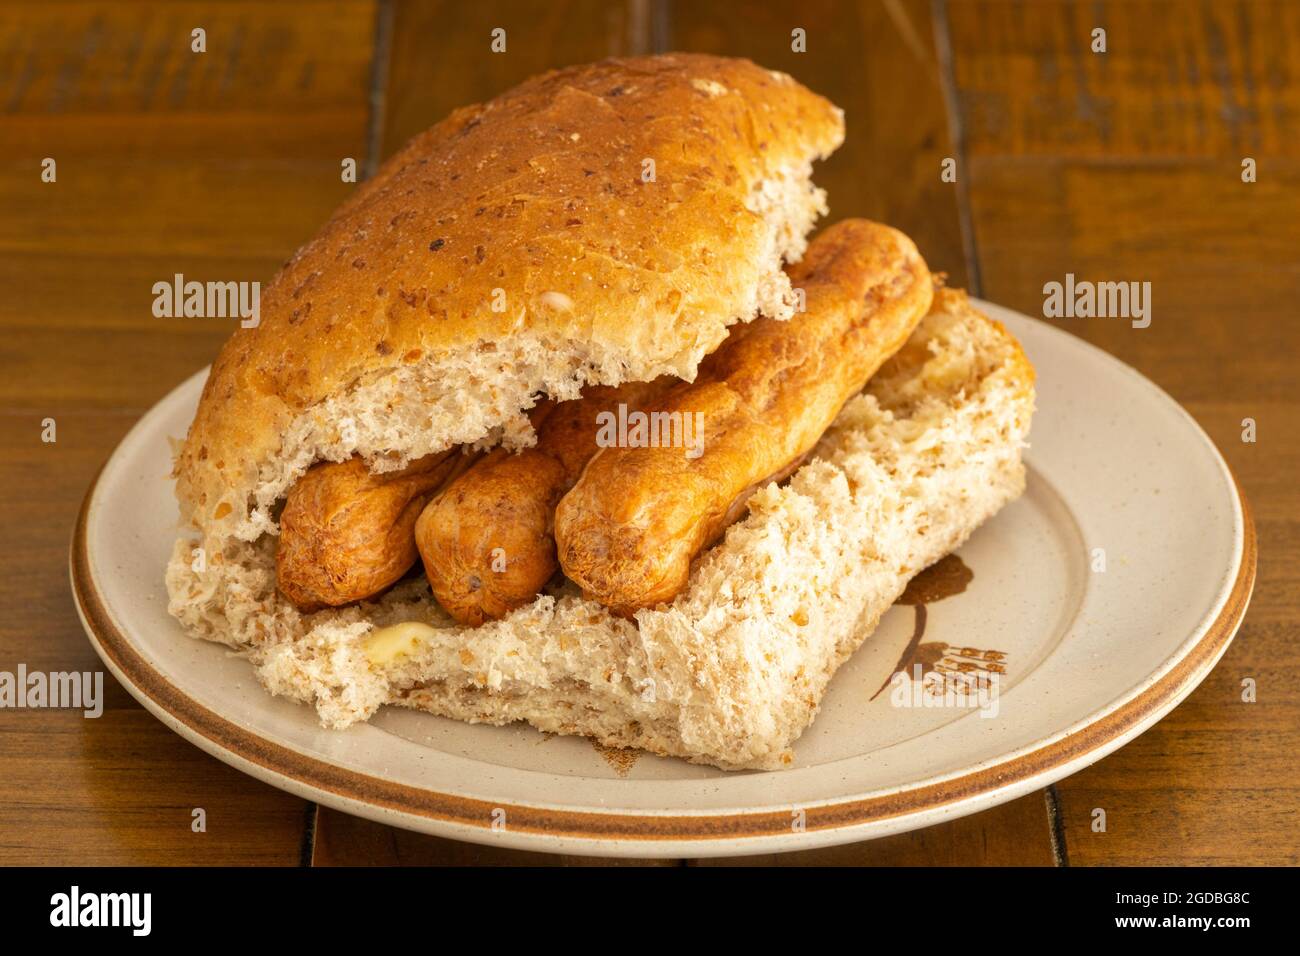 A wheaten and oatmeal roll filled with three scottish pork link sausages Stock Photo